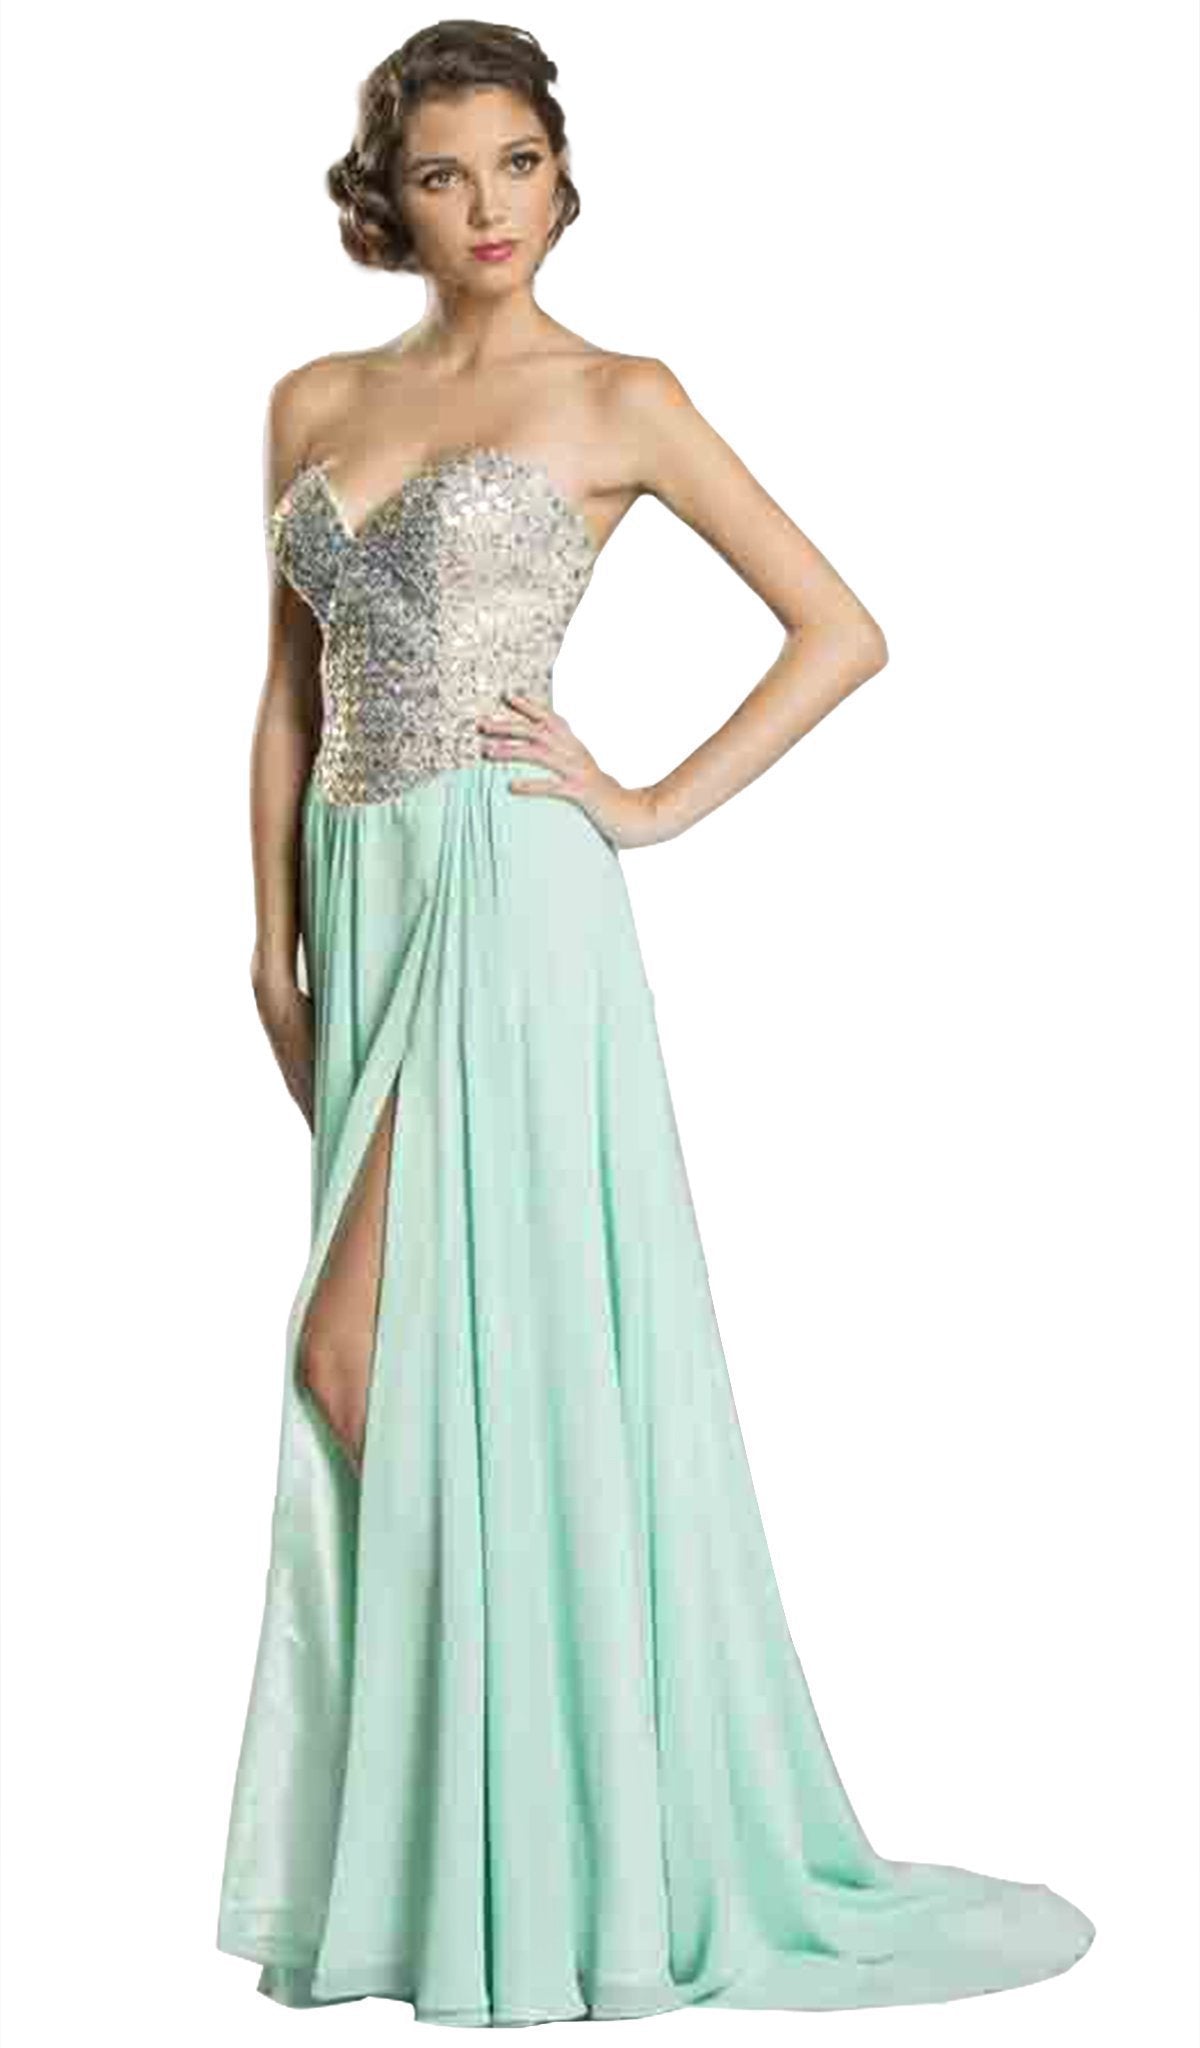 Image of Aspeed Design - Fully Beaded Bodice A-Line Prom Dress